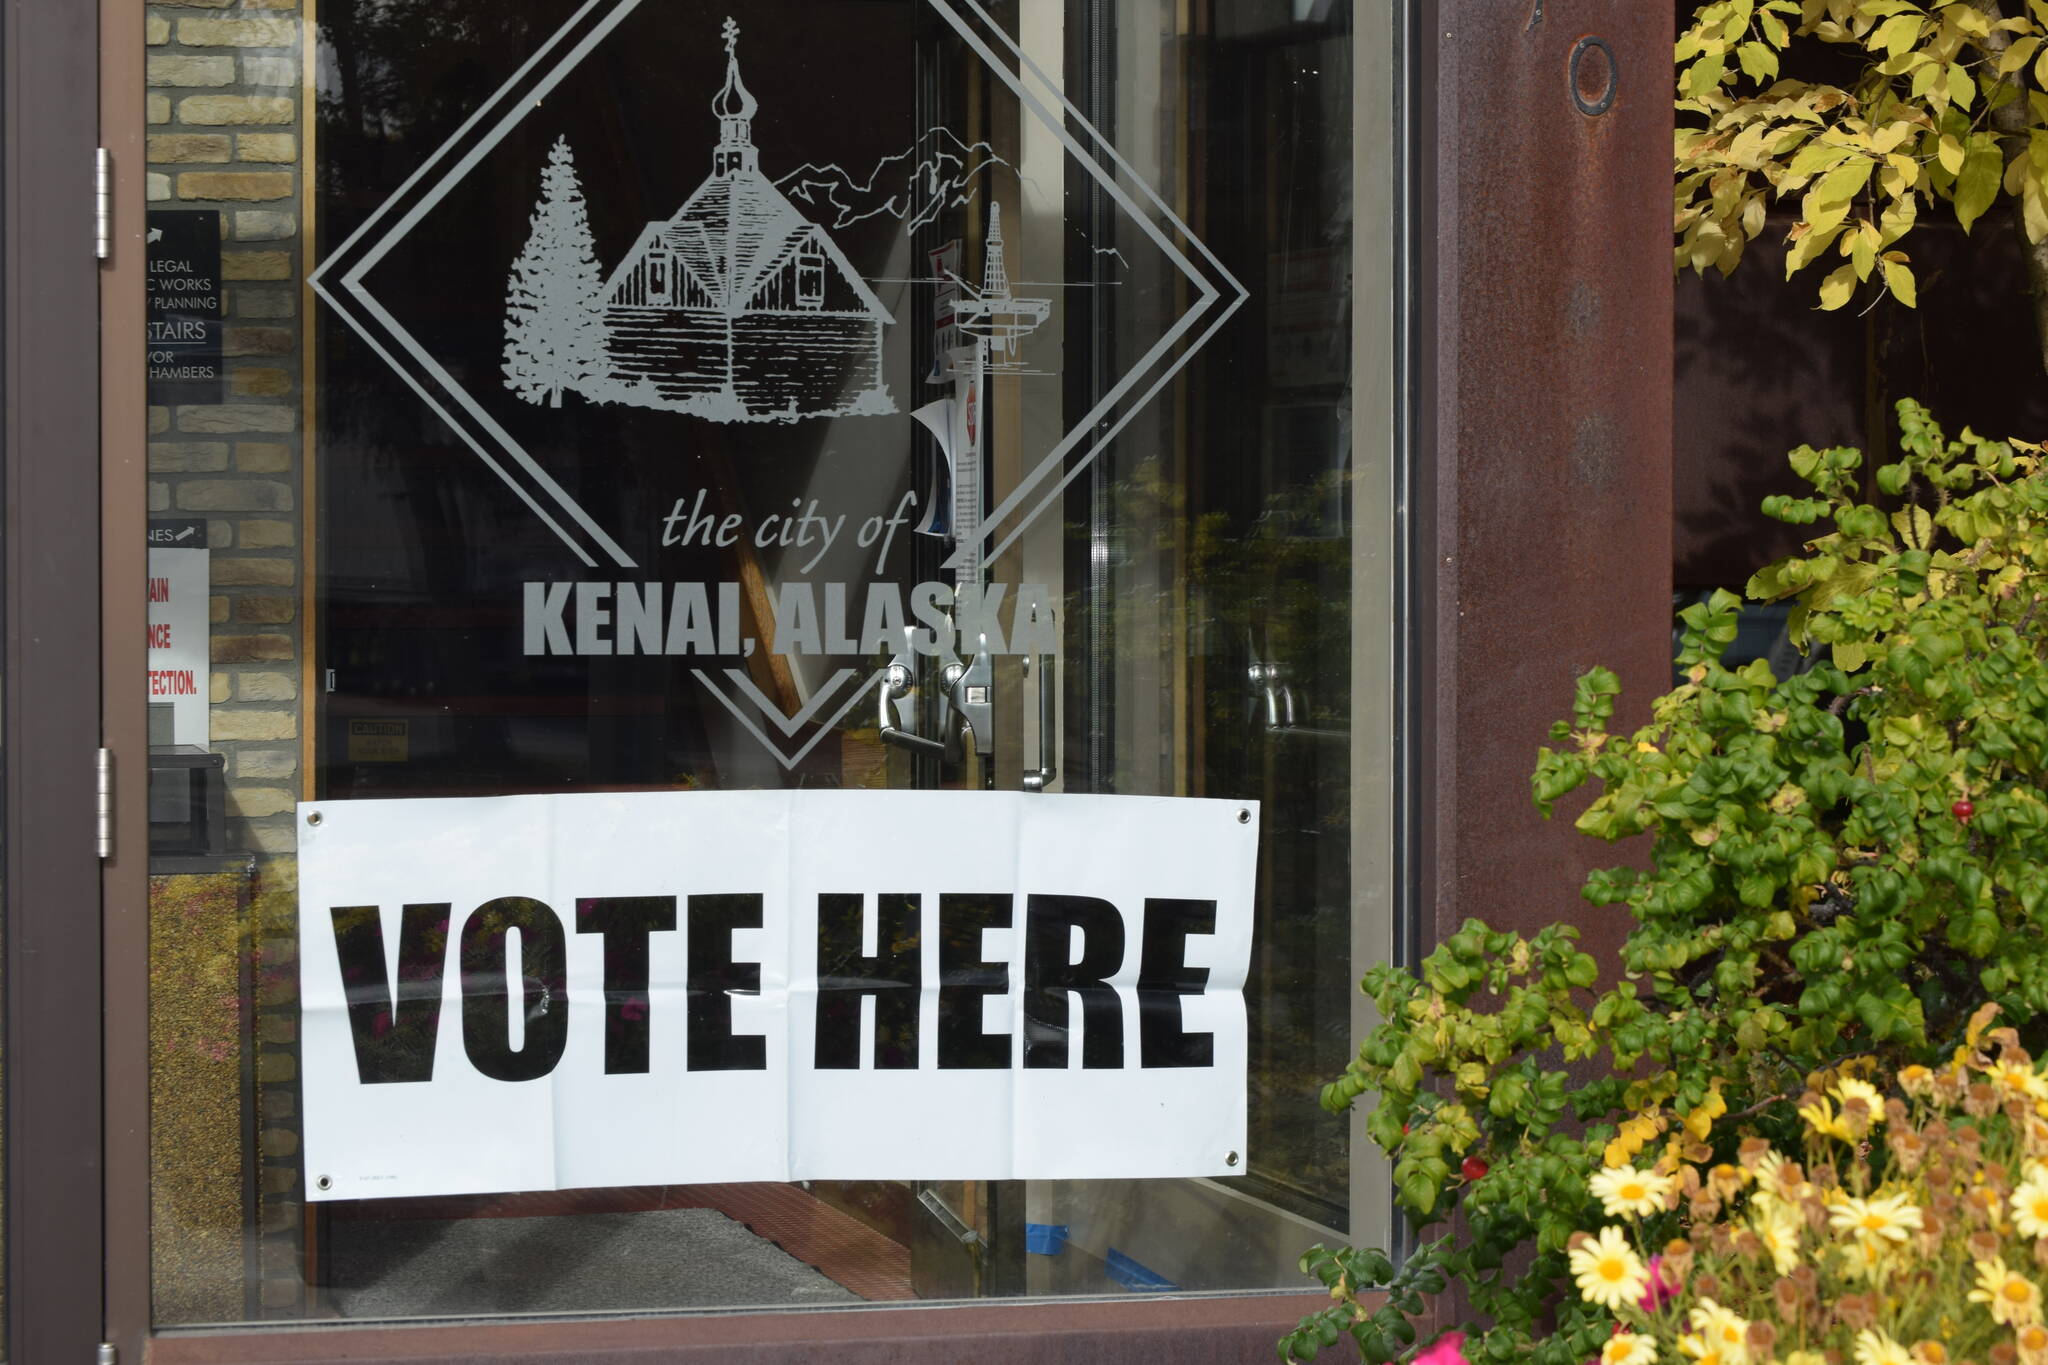 A “Vote Here” sign is seen at the City of Kenai building on Monday, Sept. 21, 2020, in Kenai, Alaska. (Clarion file)